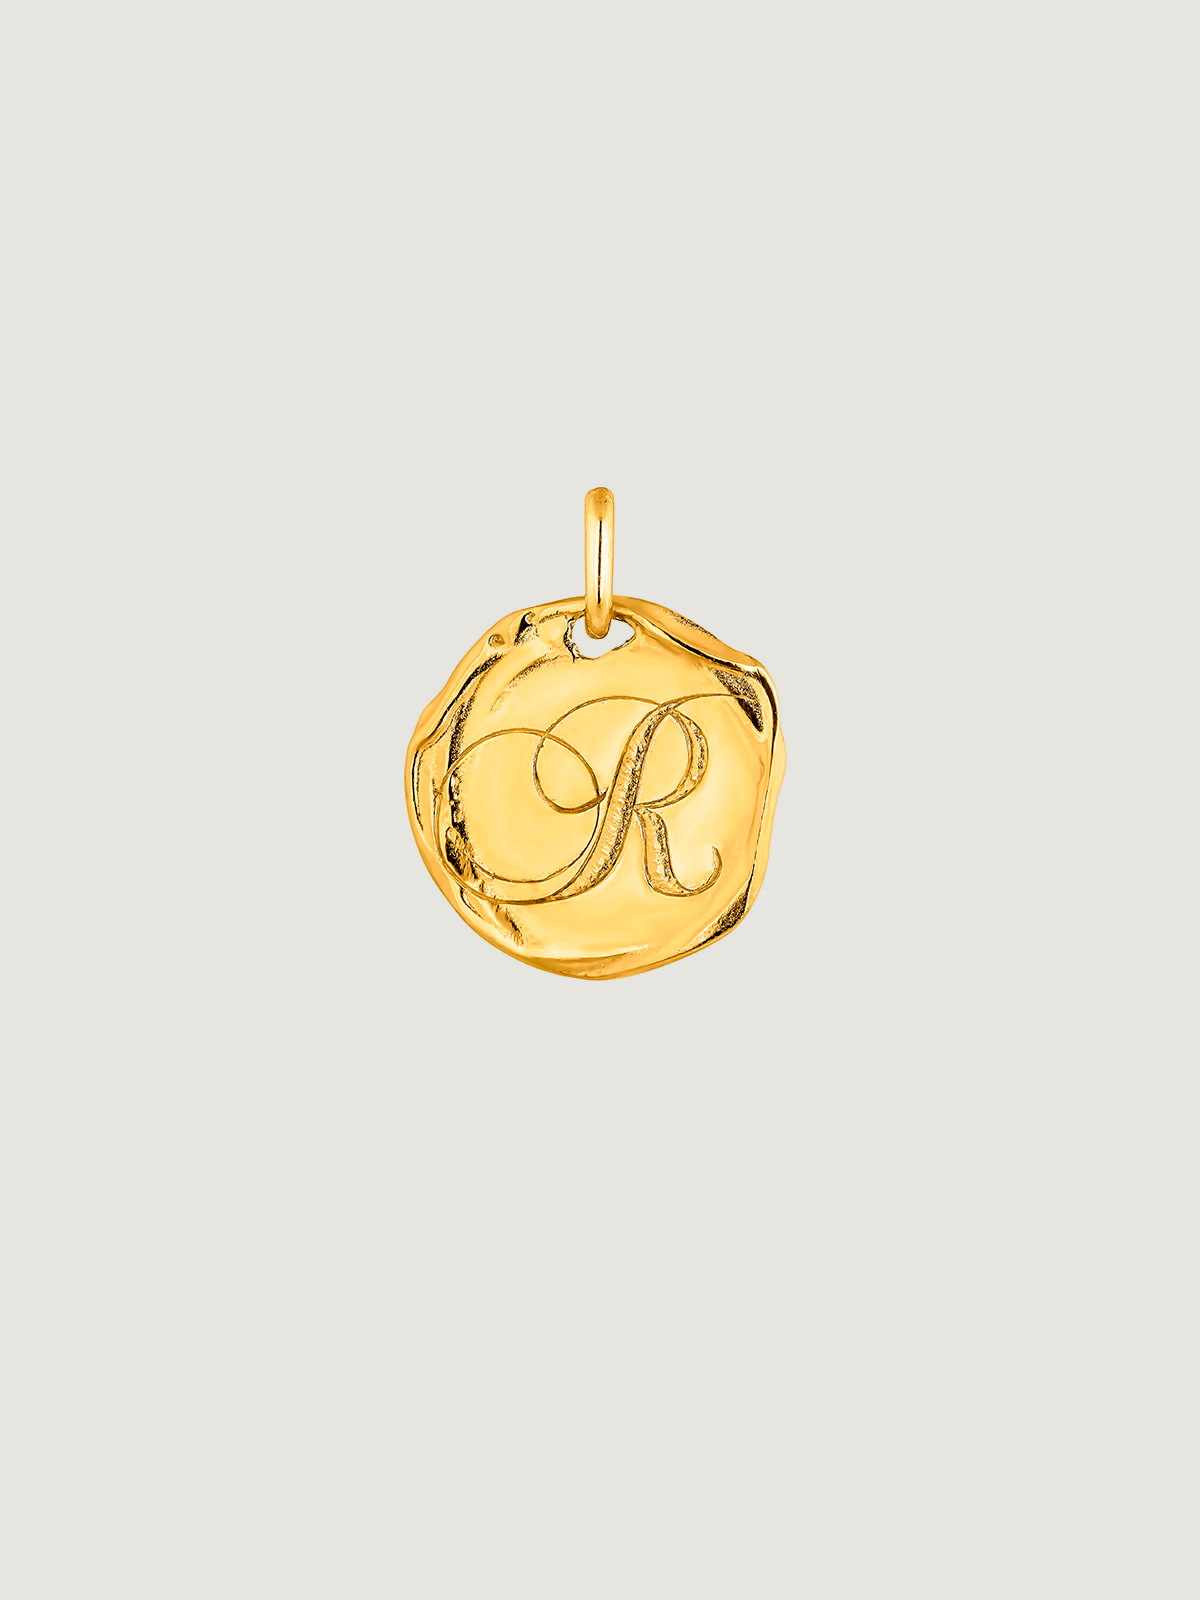 Handcrafted 925 silver charm bathed in 18K yellow gold with initial R.